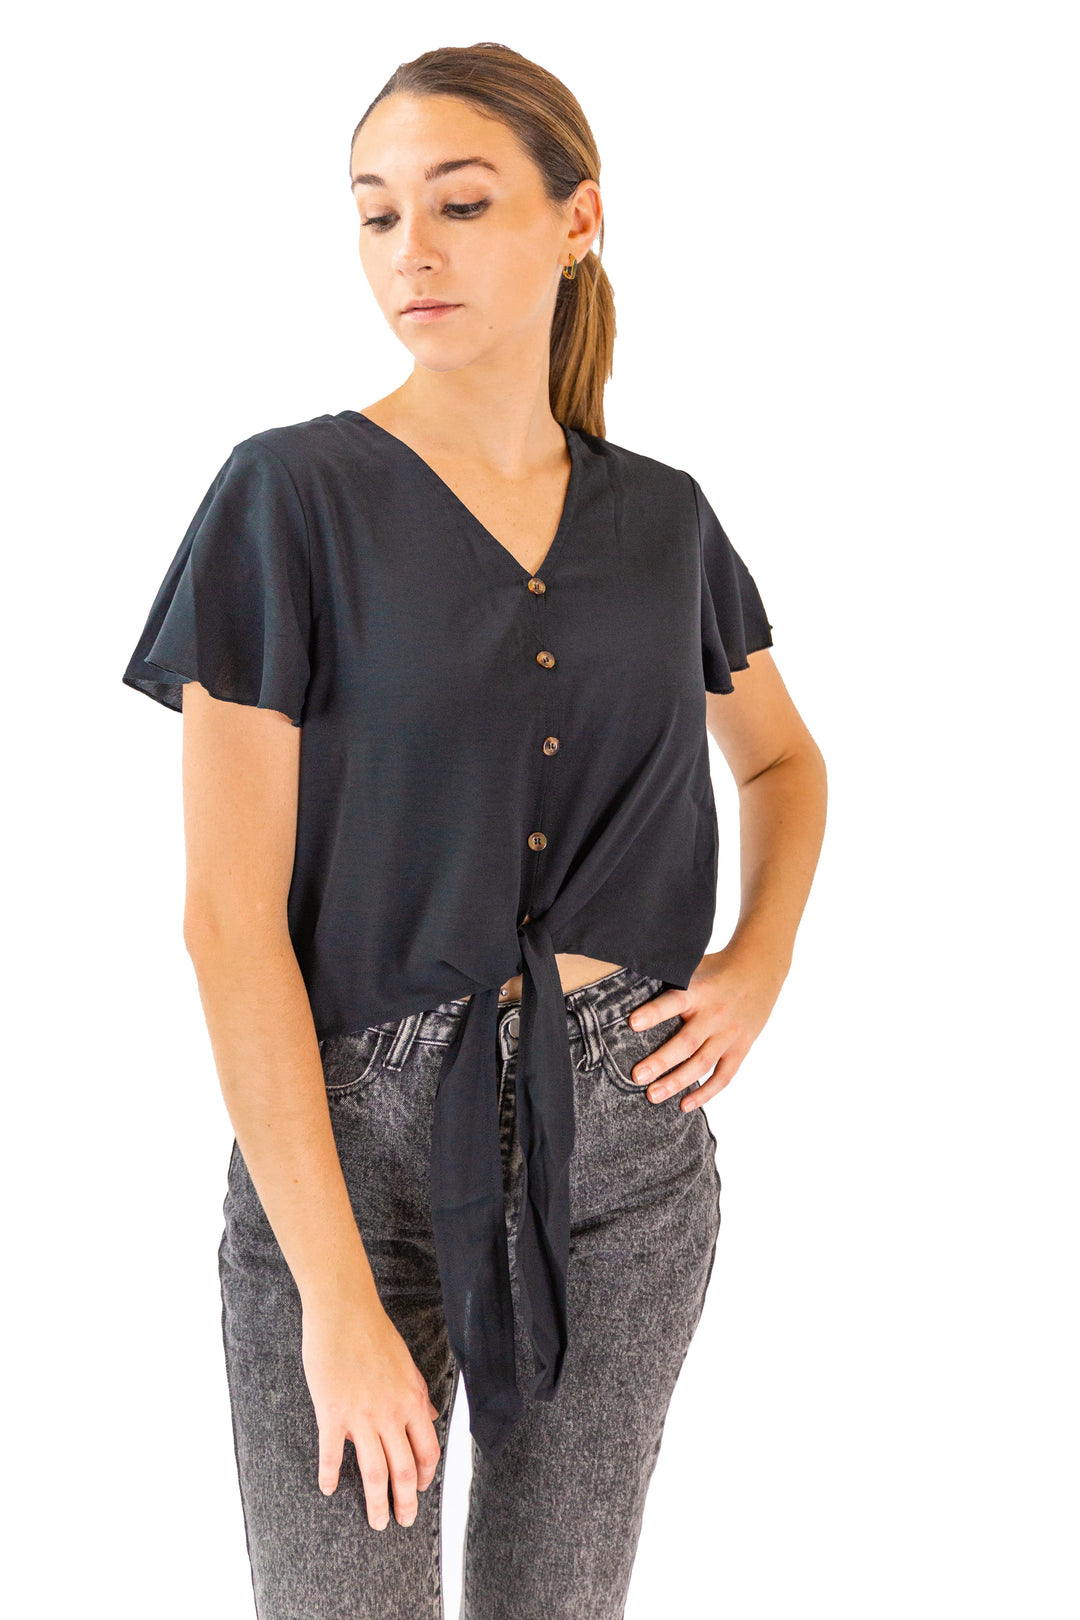 Fabonics Black Elegance Crop Top with Knot-Up and Buttoned Design in Chic and Modern Style